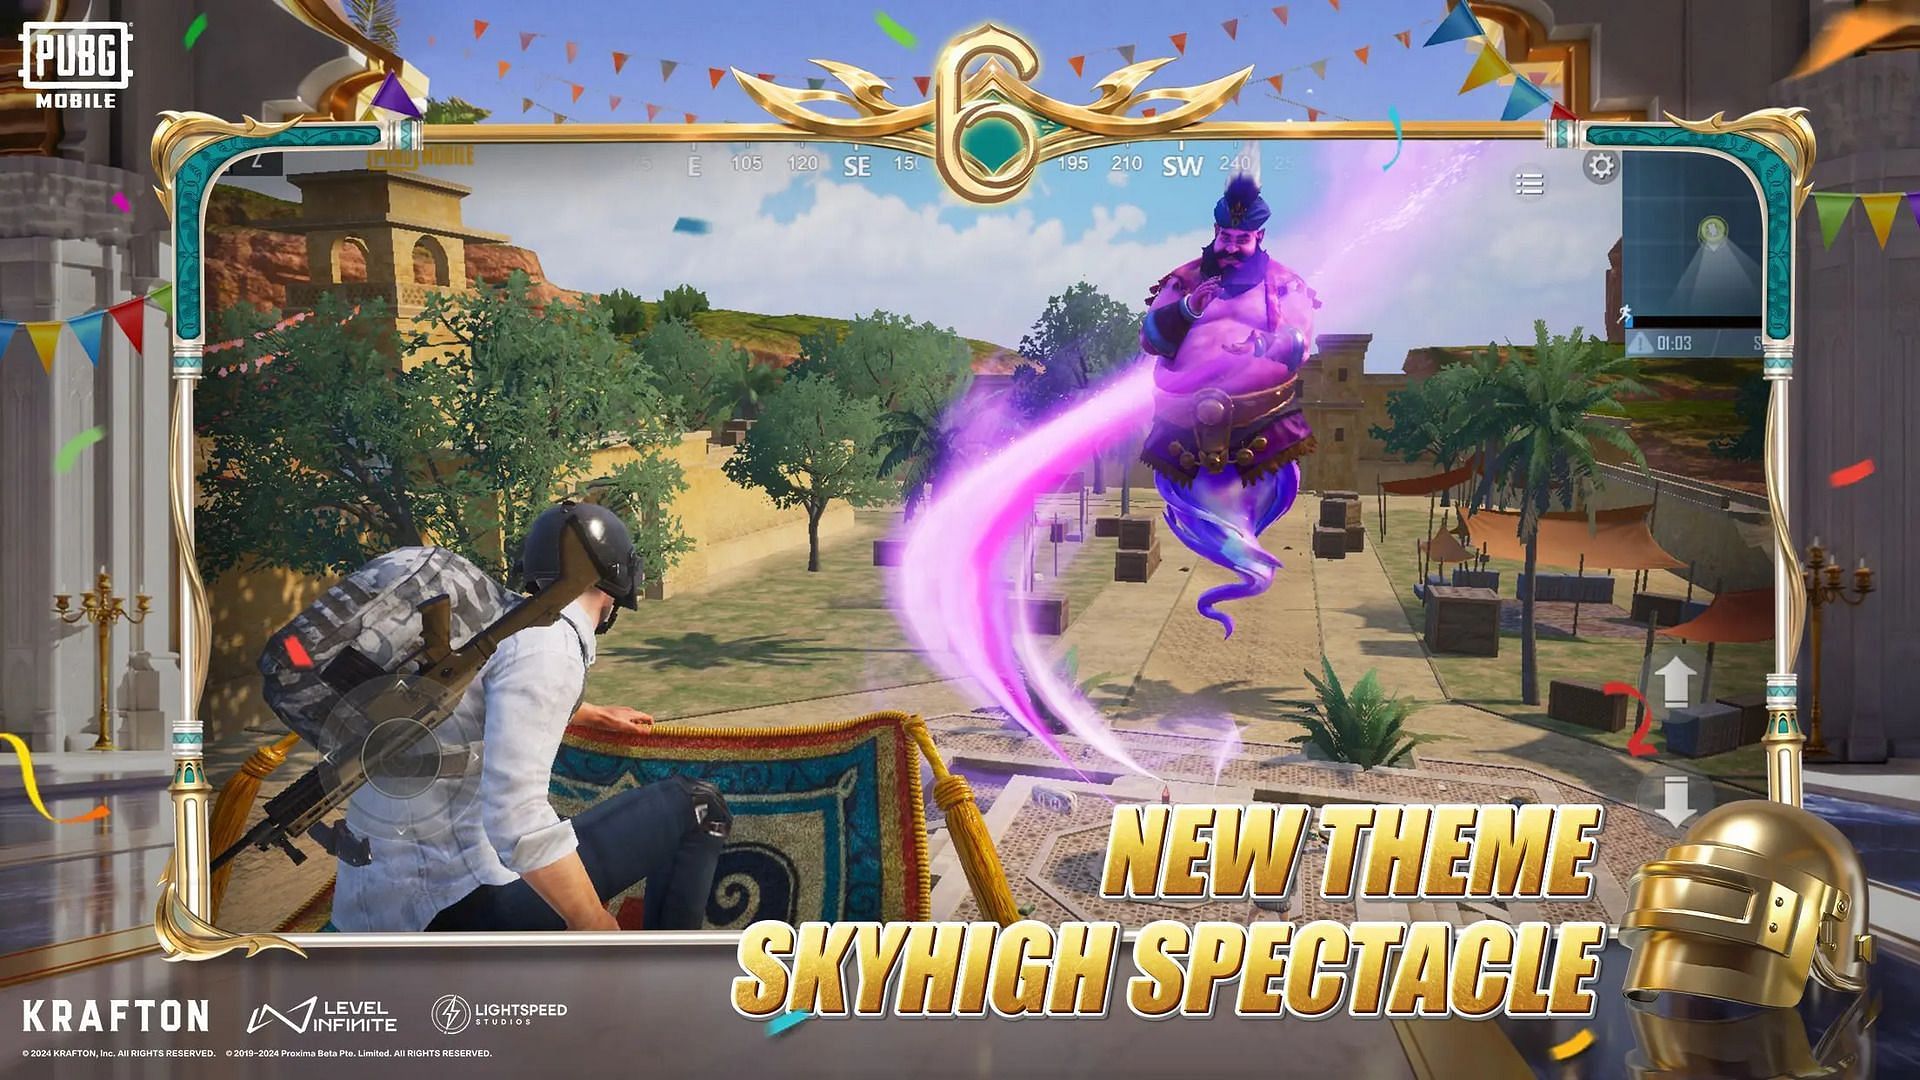 Skyhigh Spectacle (Image via Tencent Games)